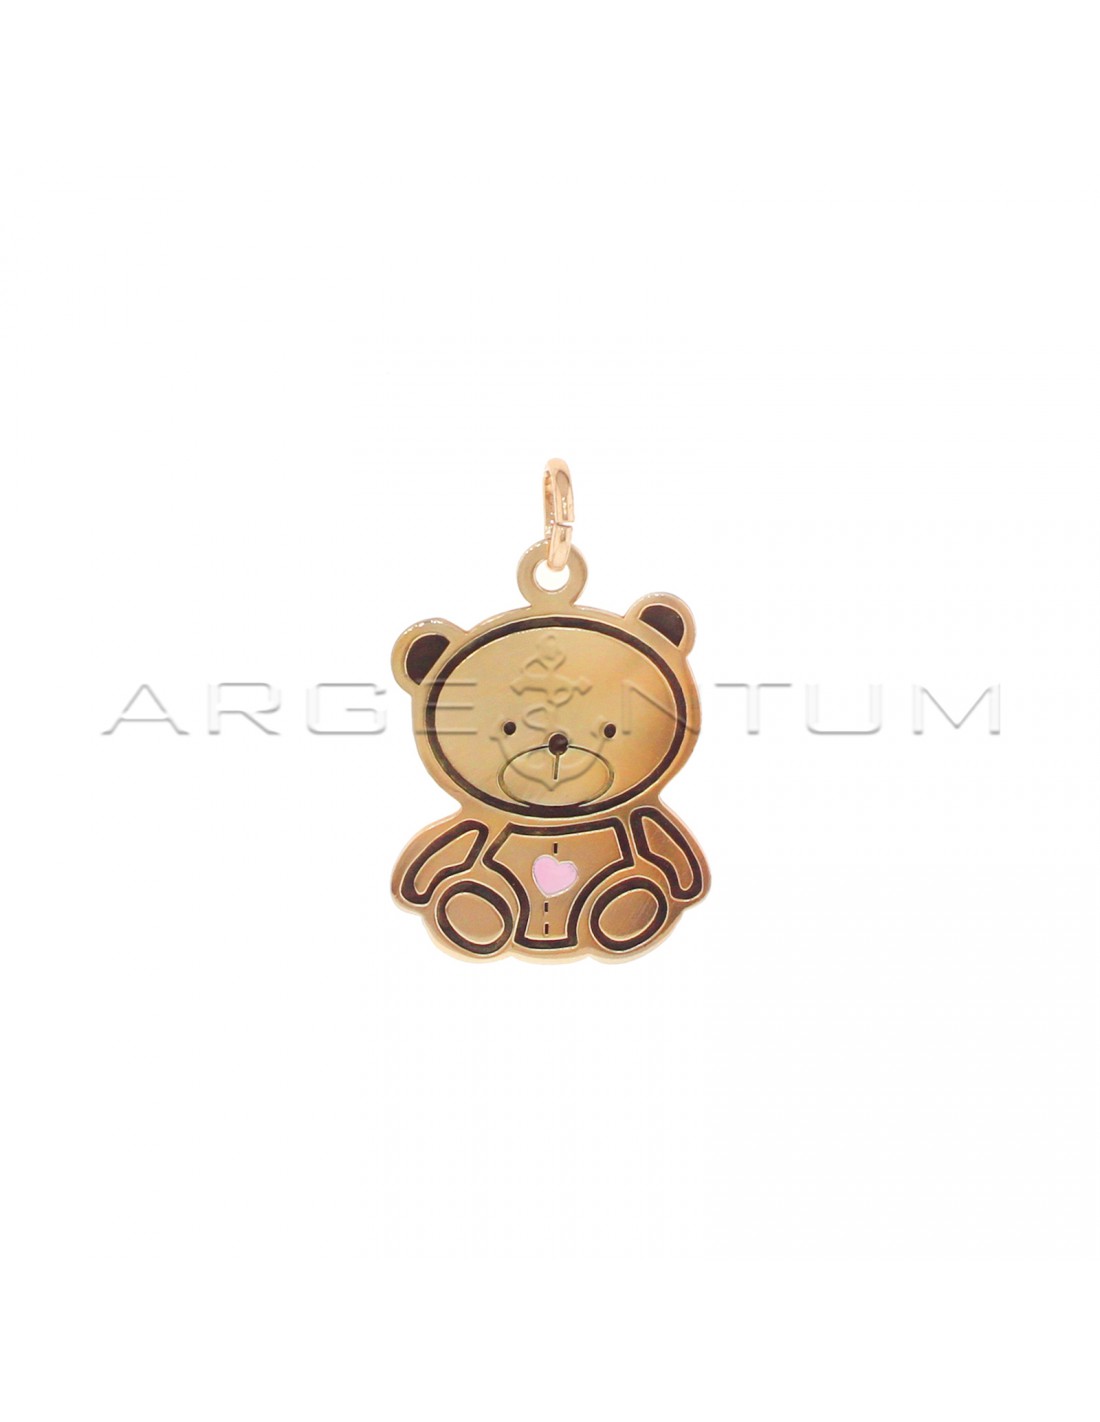 Classic Teddy Bear Charm Outline 34x20mm (1.3x0.8in) Pendant in .925  Sterling Silver - Walmart.com